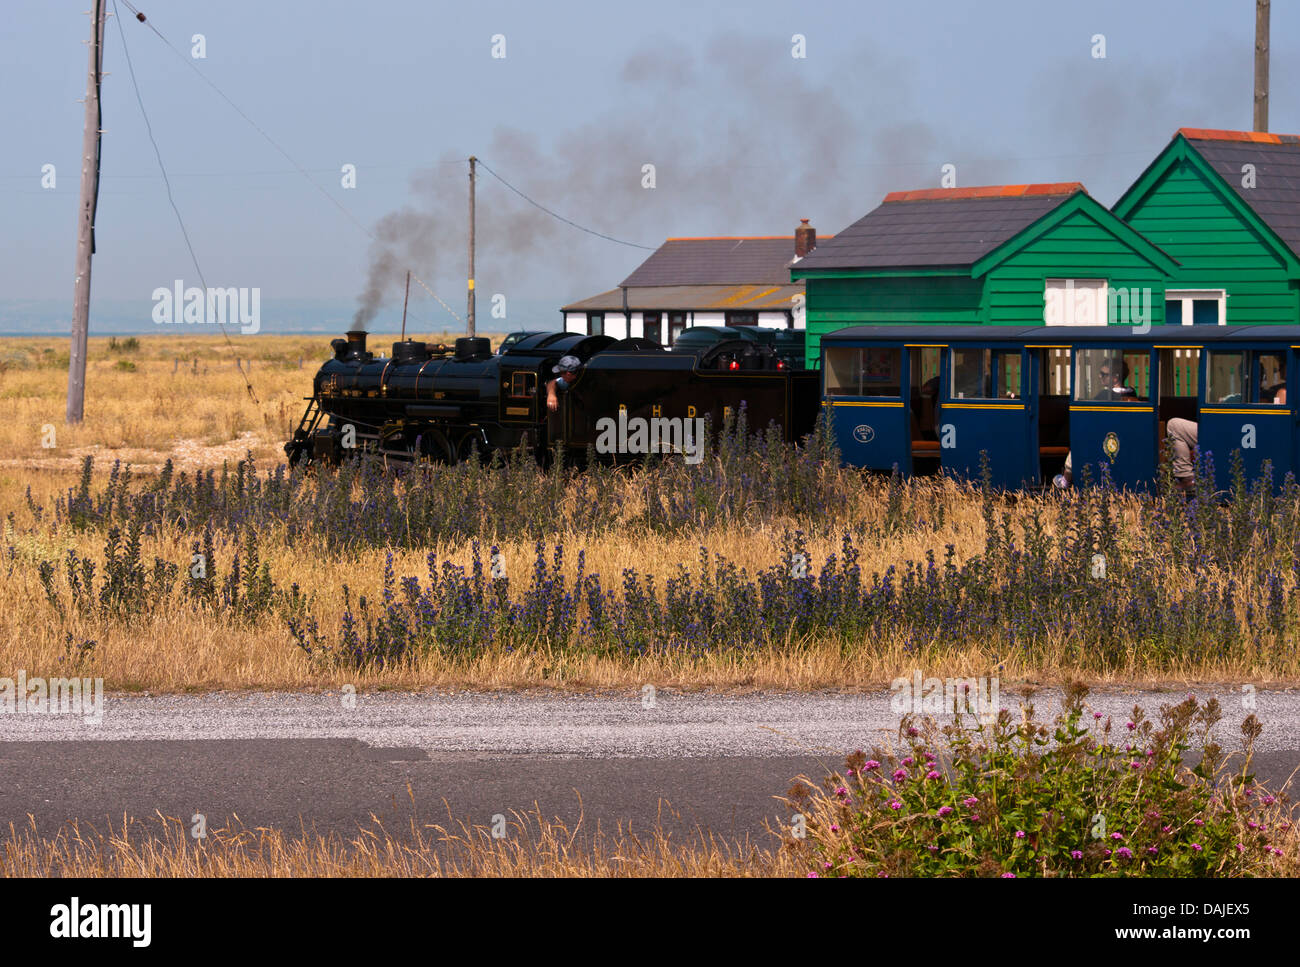 Romney Hythe and Dymchurch Miniature Steam Railway Locomotive Train Doctor Syn at Dungeness Kent UK Stock Photo